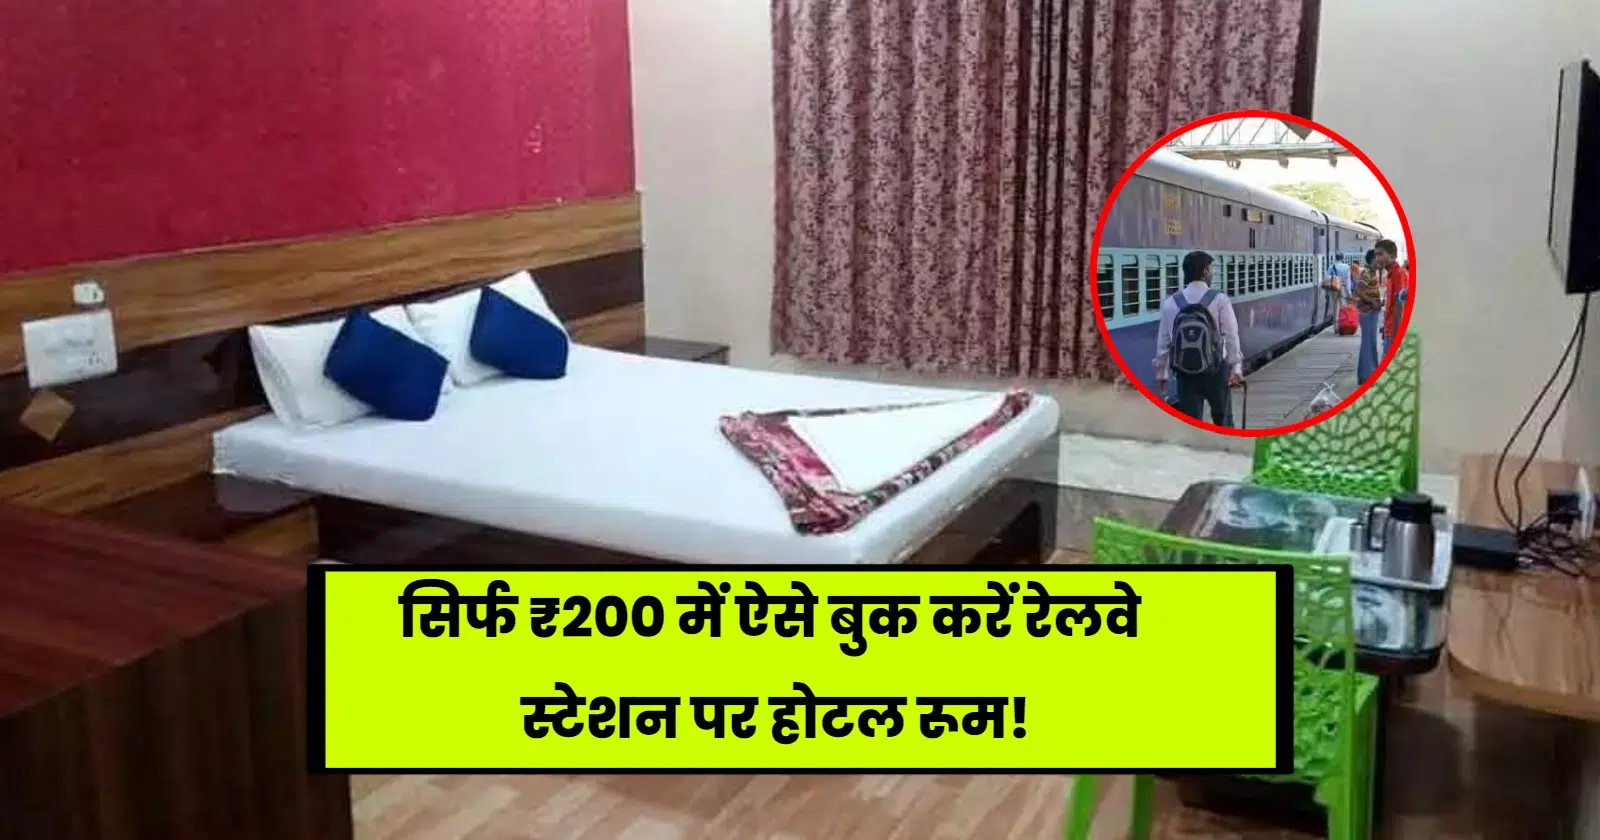 Hotel Room At Railway Station